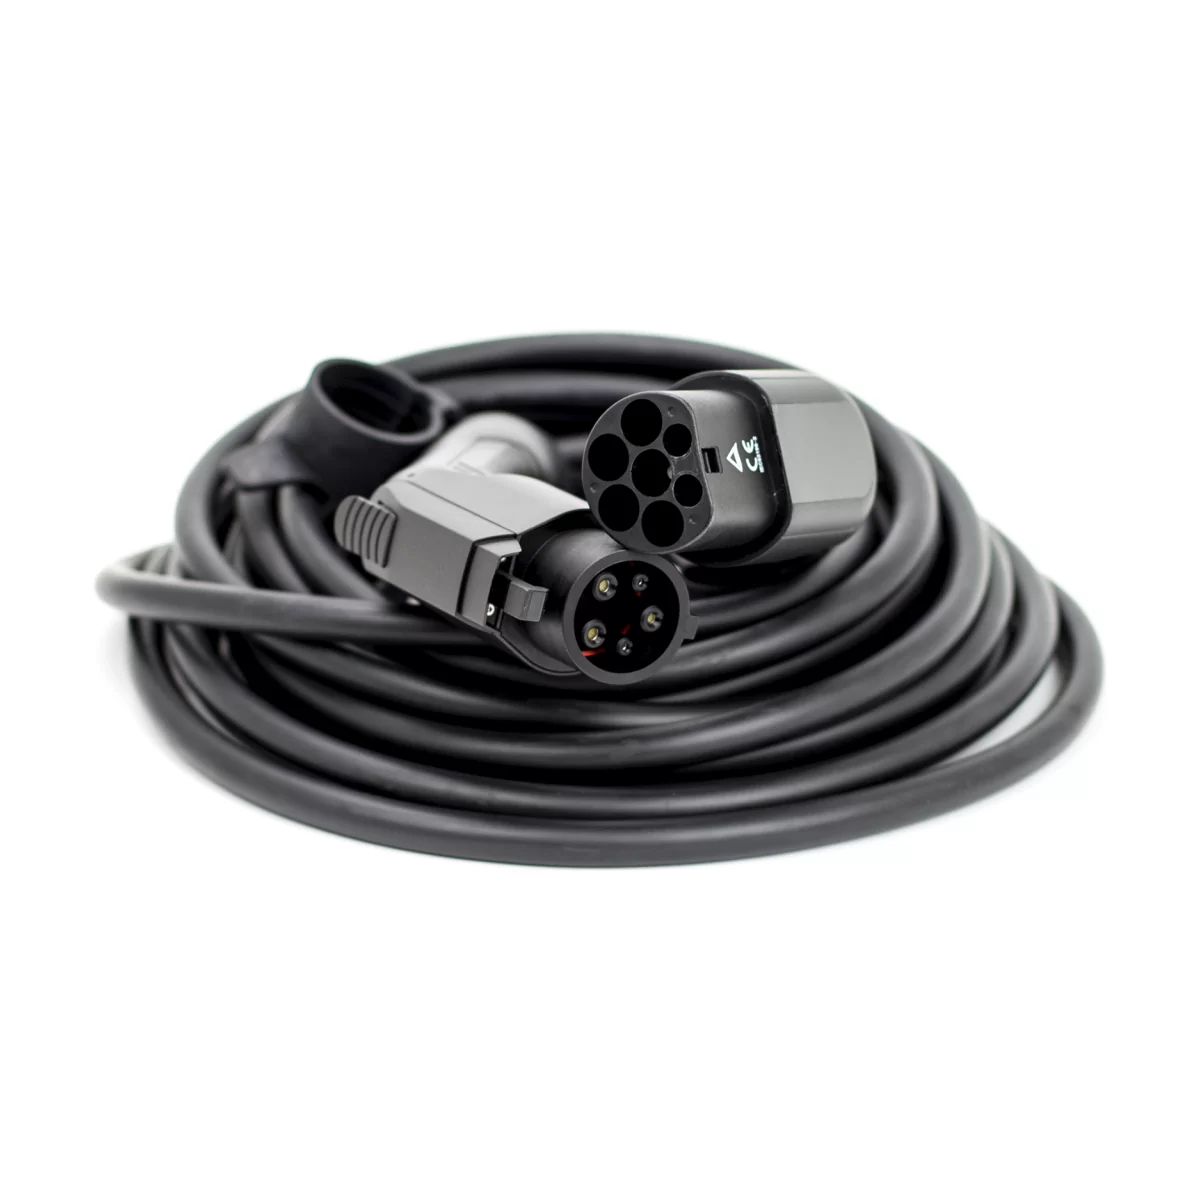 Type 2 - Type 2 Electric Vehicle Charge Cable 32 amp (5m and 10m